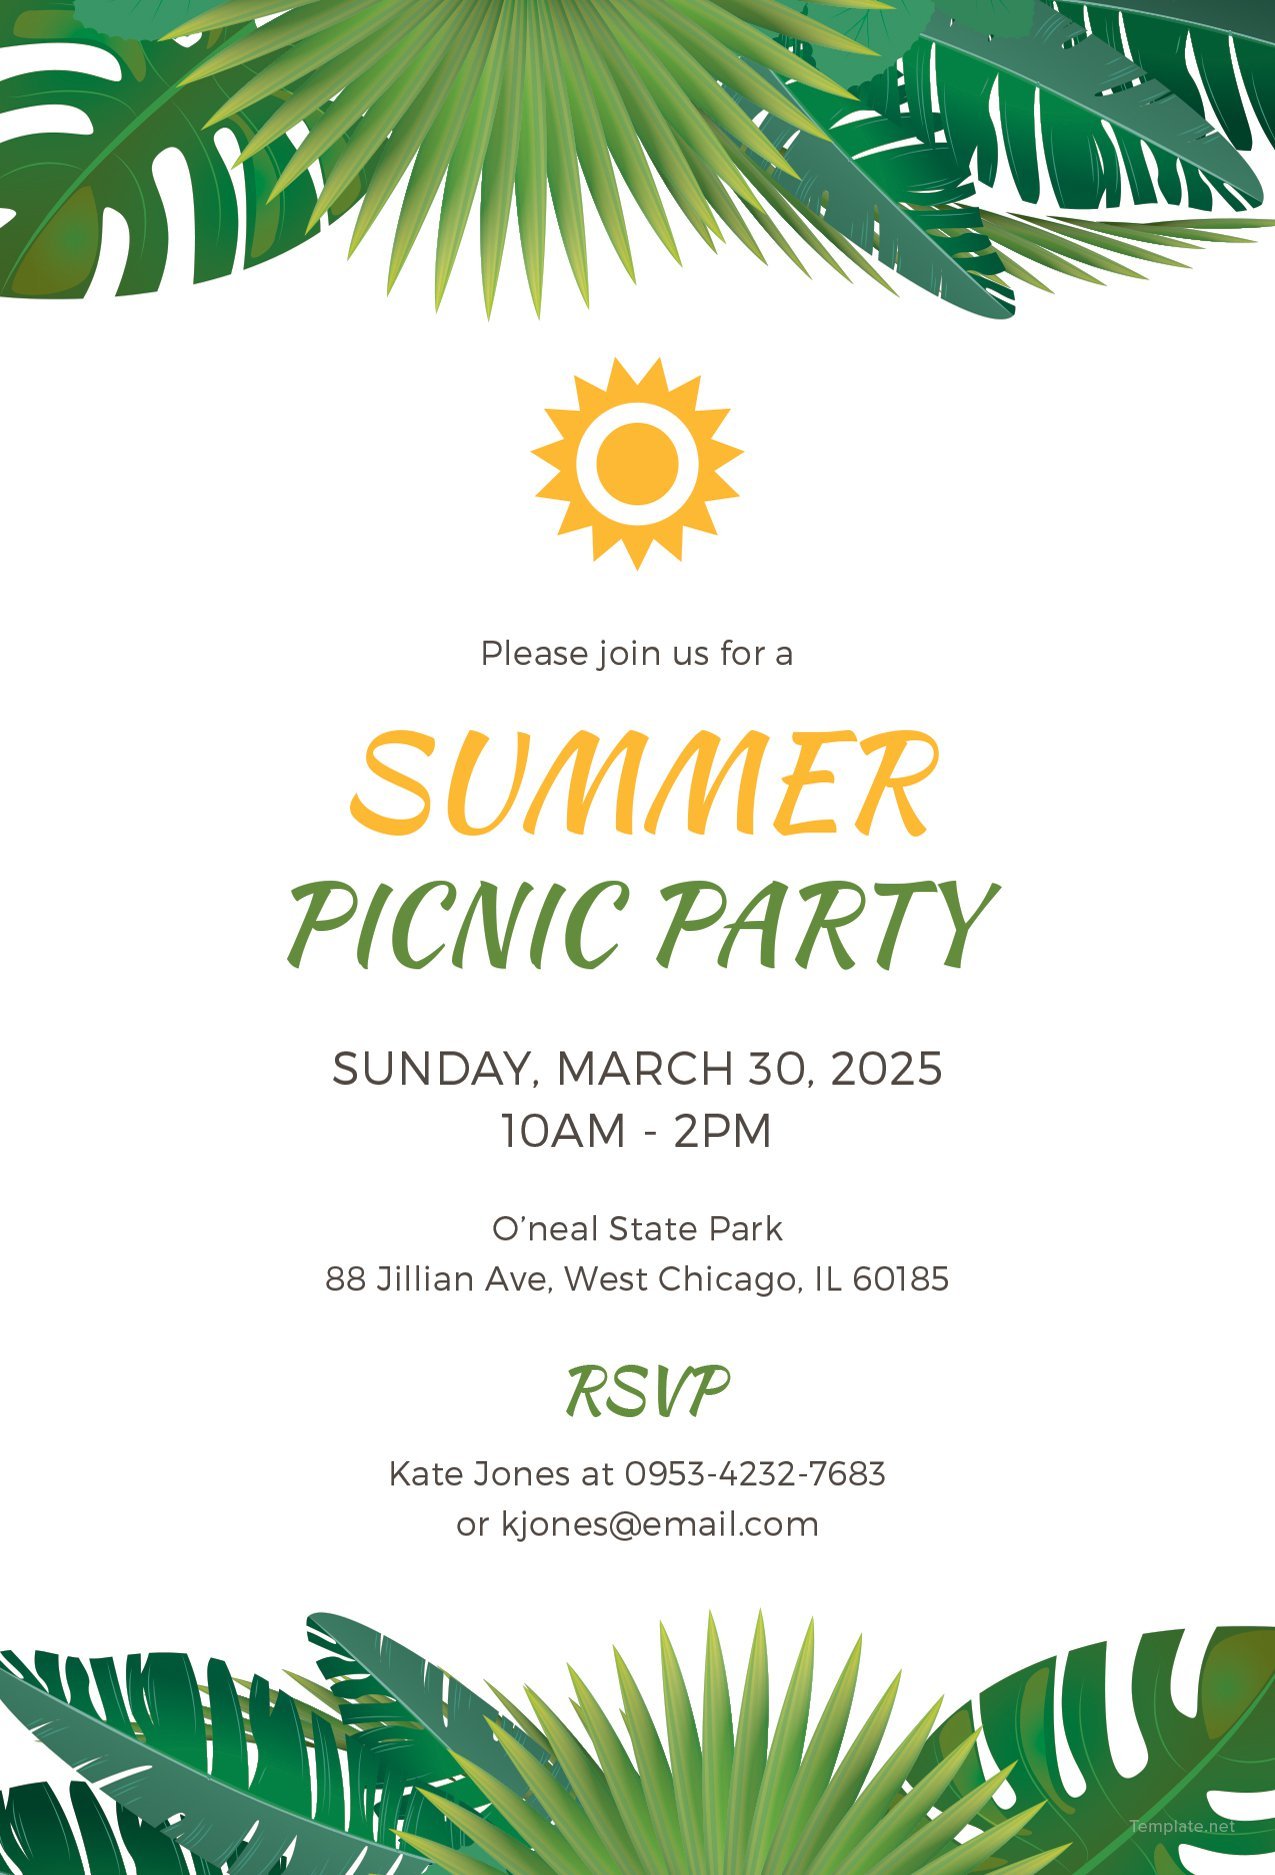 Free Summer Picnic Party Invitation Template in Microsoft Word